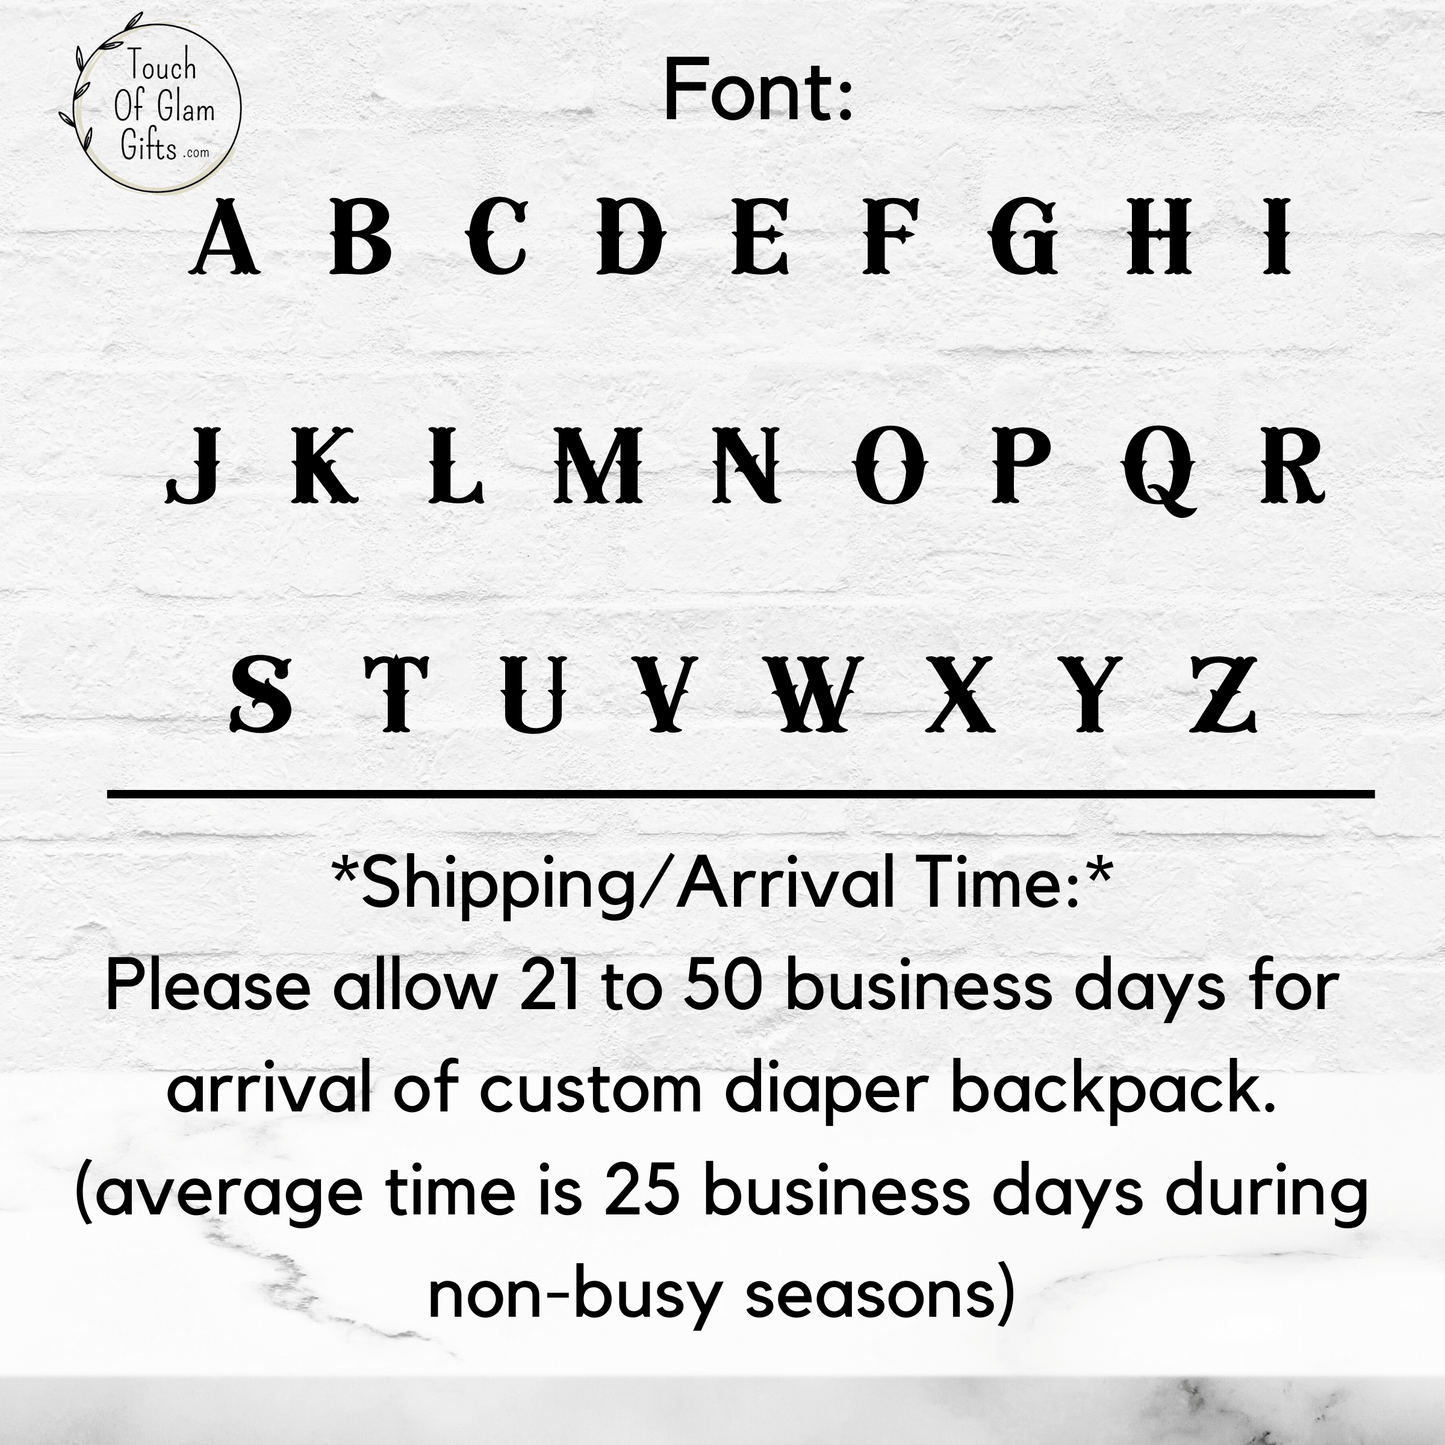 Our monogrammed font alphabet is a western style showing all the letters. average arrival time is twenty five days.